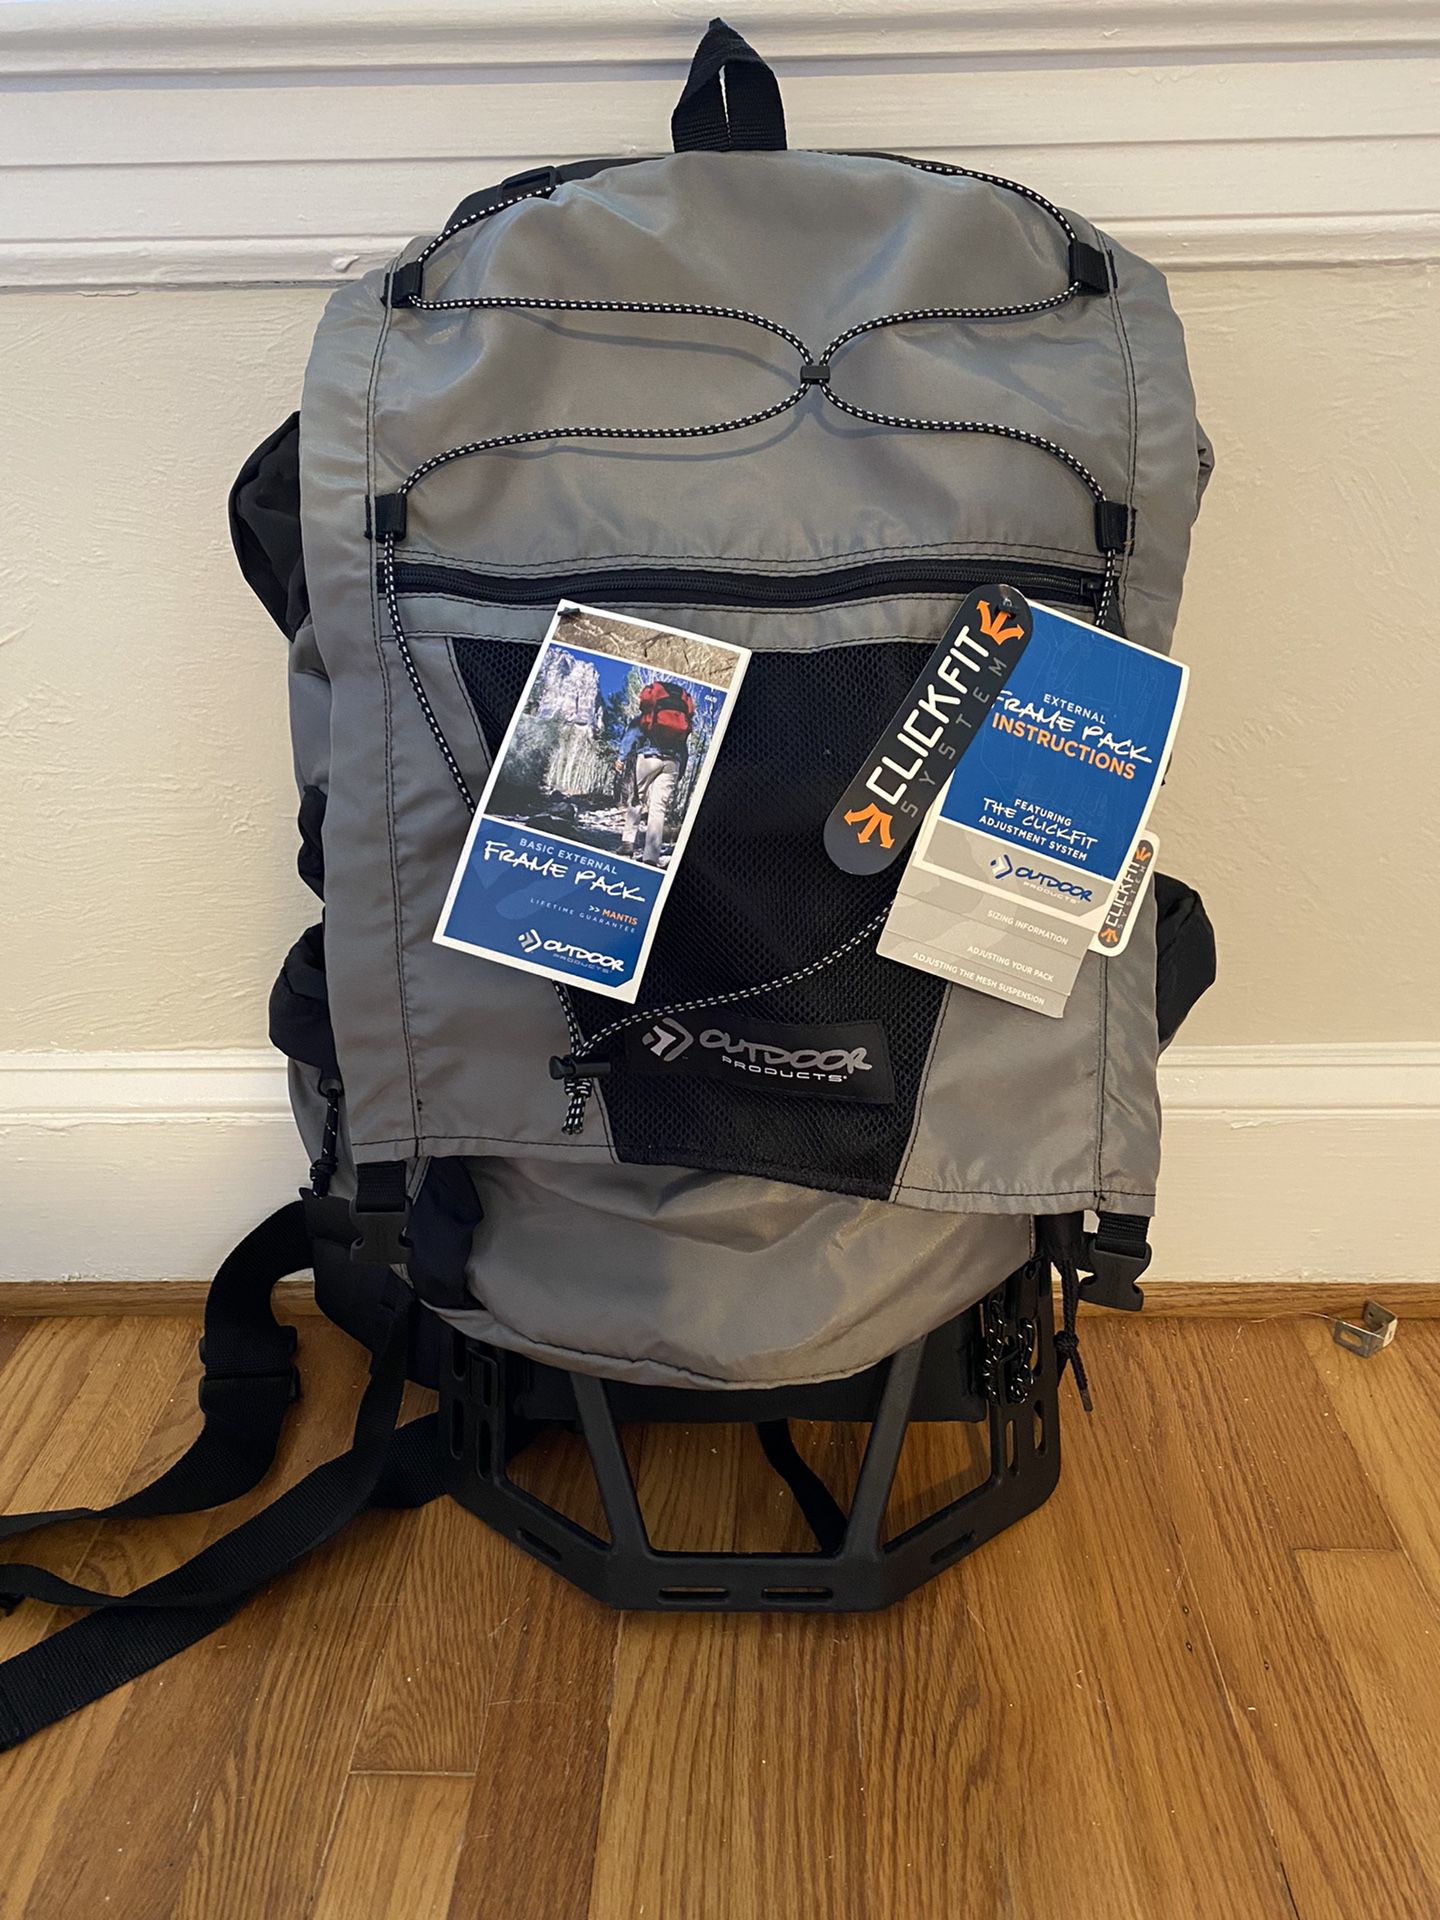 NEW W/ TAGS! Outdoor Products-Basic External Frame Backpack